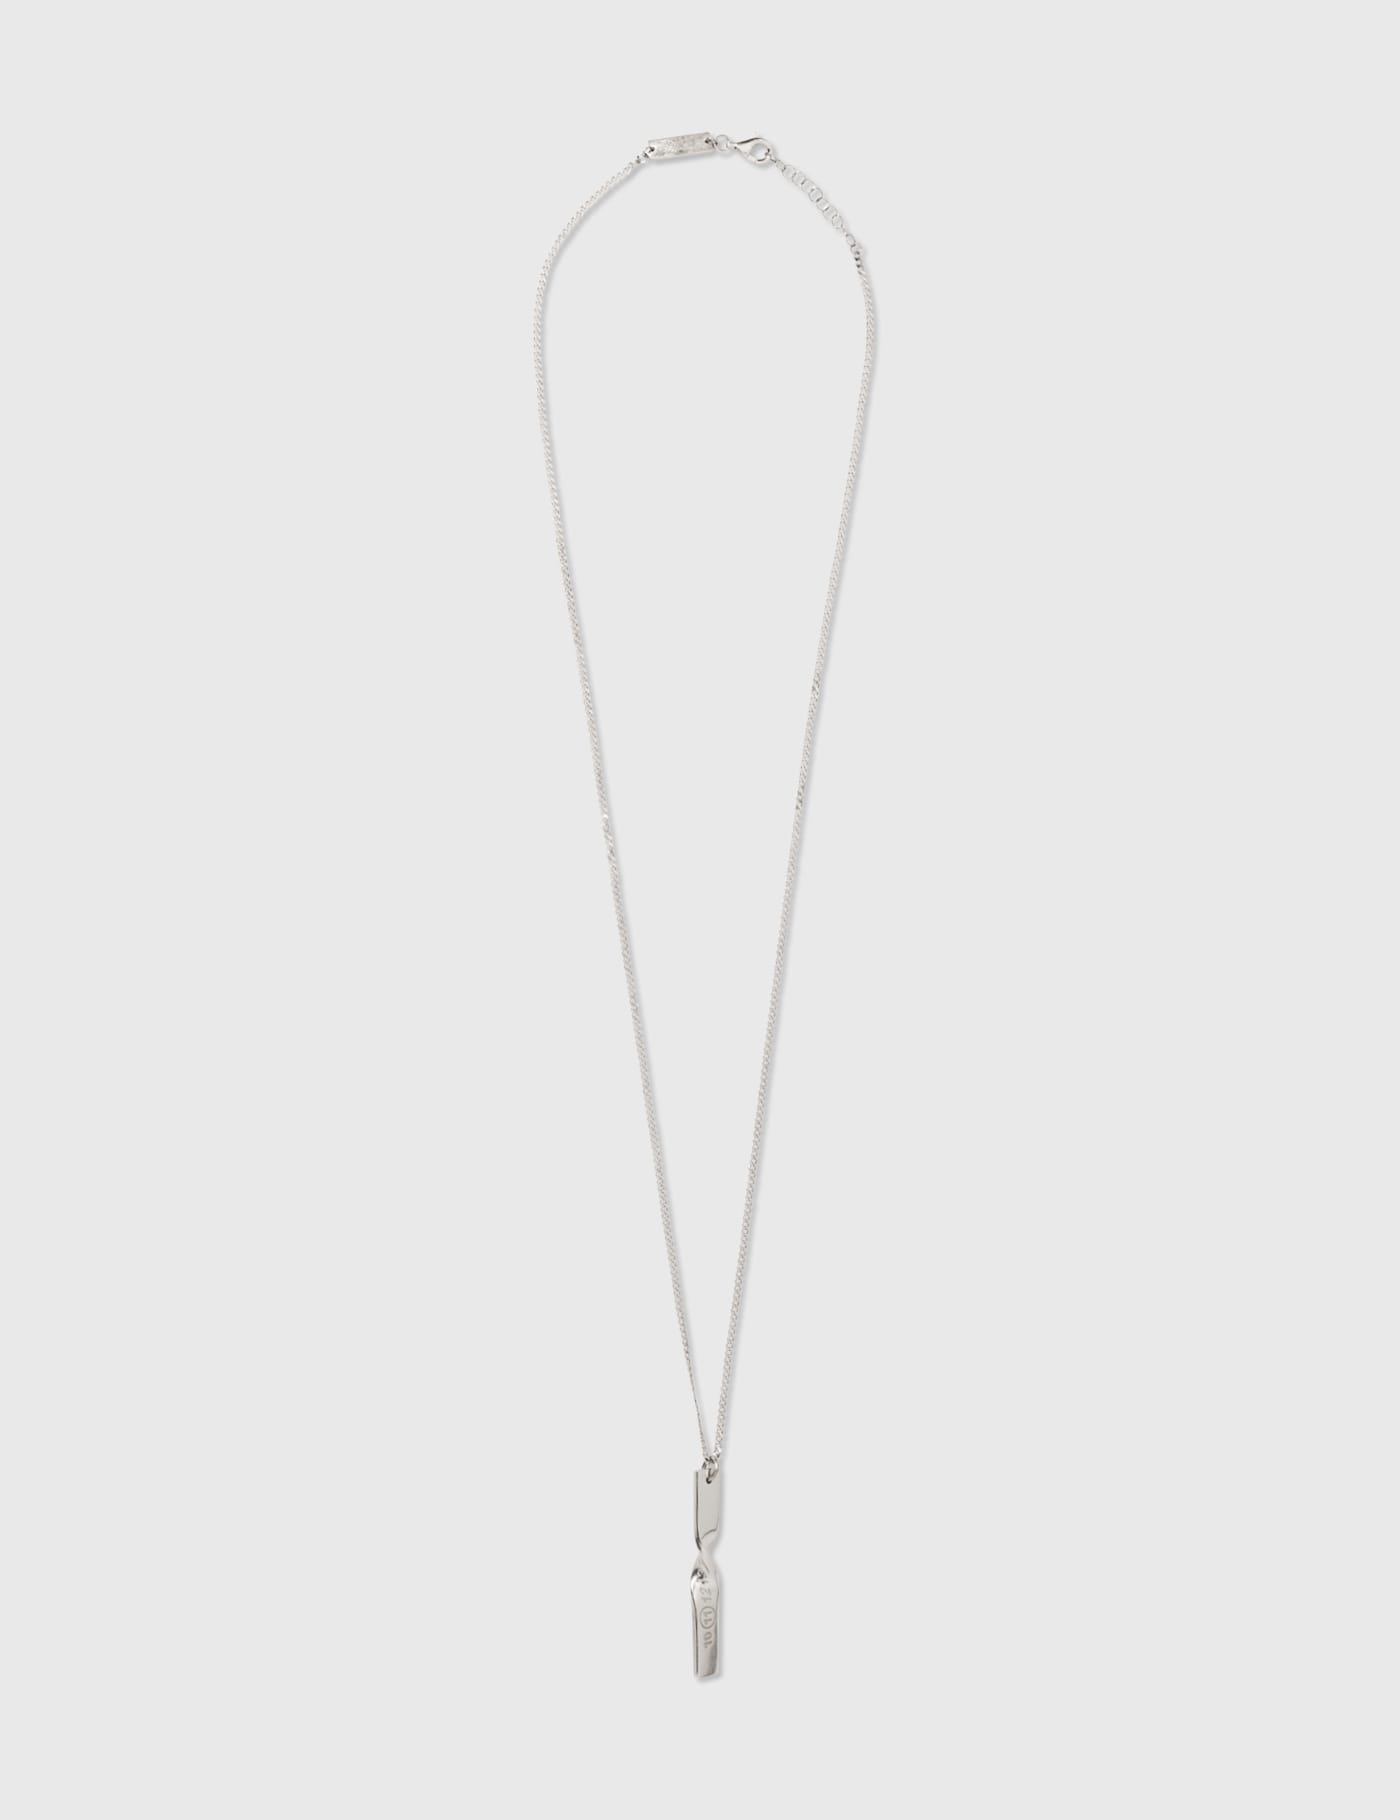 Maison Margiela Necklace in Silver for Men Metallic Mens Jewellery Necklaces 